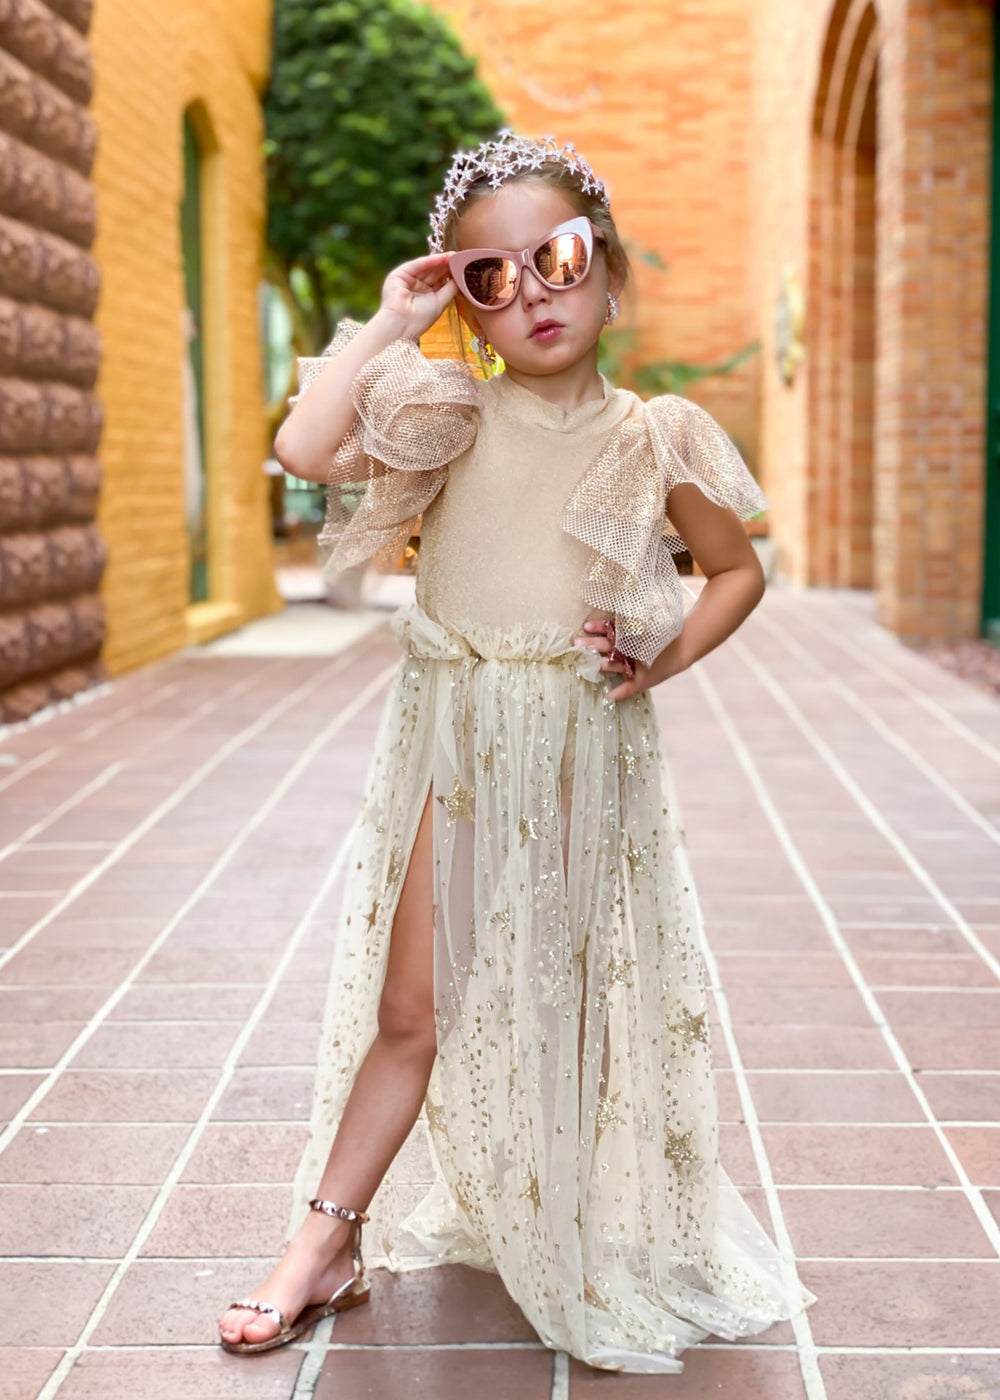 Kid's Aria Rose Gold Sandals - STYLED BY ALX COUTUREKid's Shoes